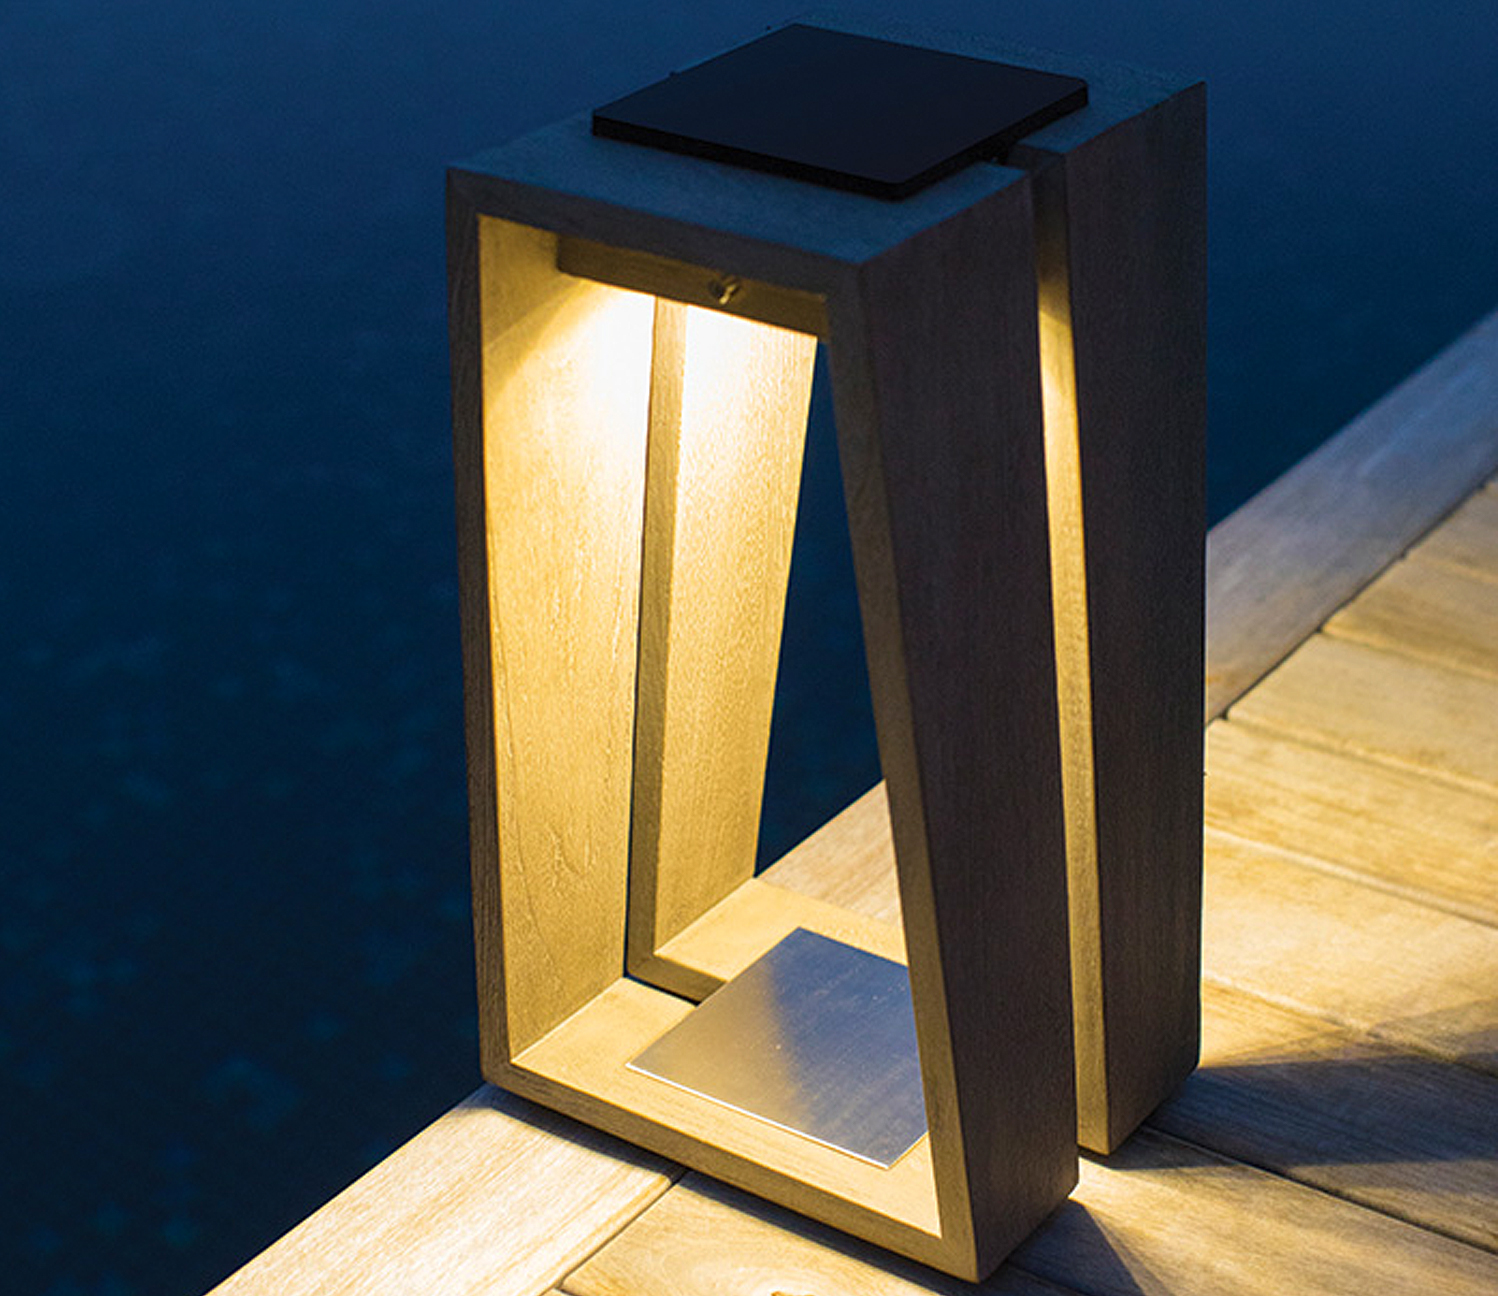 Introducing the Skaal lantern from Les Jardins Solar Lighting 